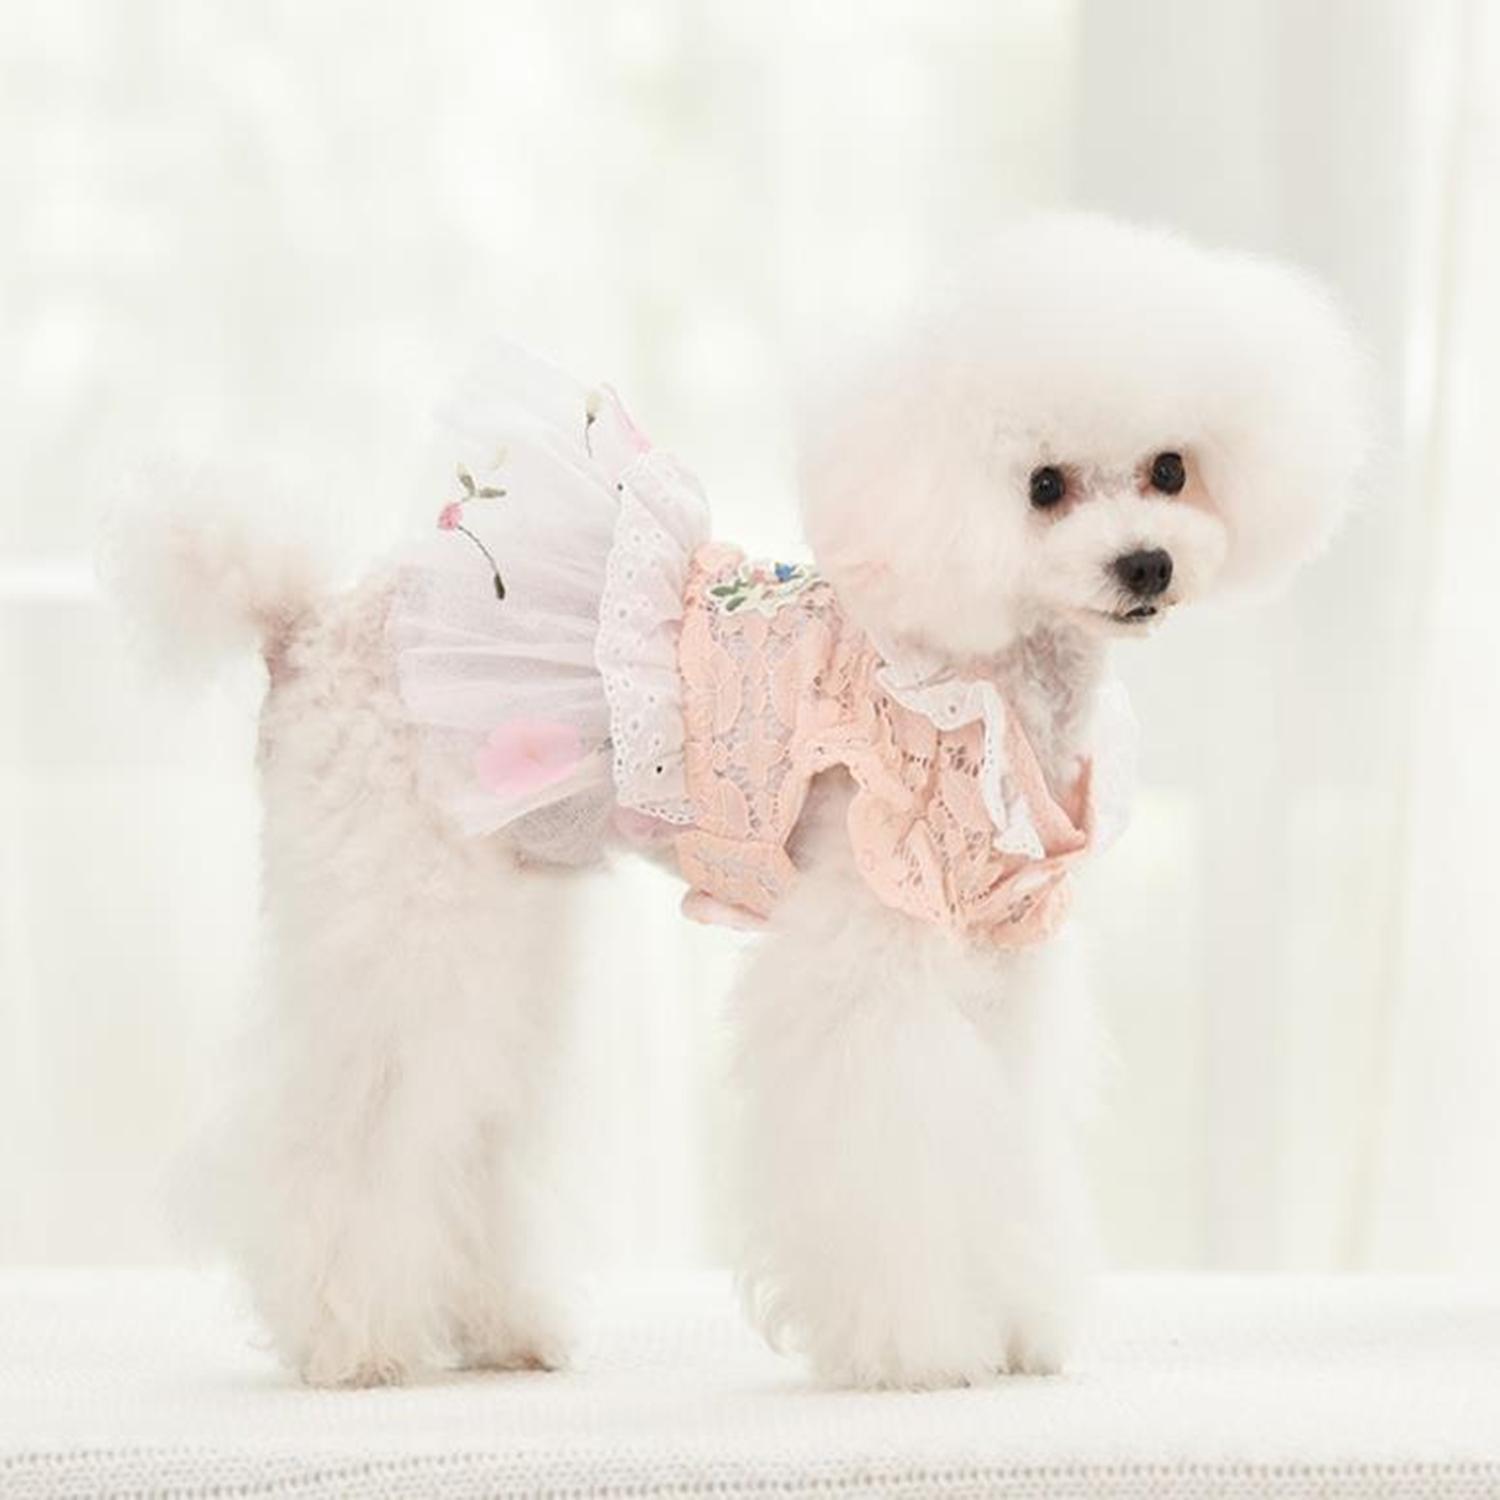 WEEGUBENG Skirt Cat Apparel Doggie Costumes Bird Embroidery Floral Dogs Lace Skirt Dog Dress Puppy Princess Jumpsuit